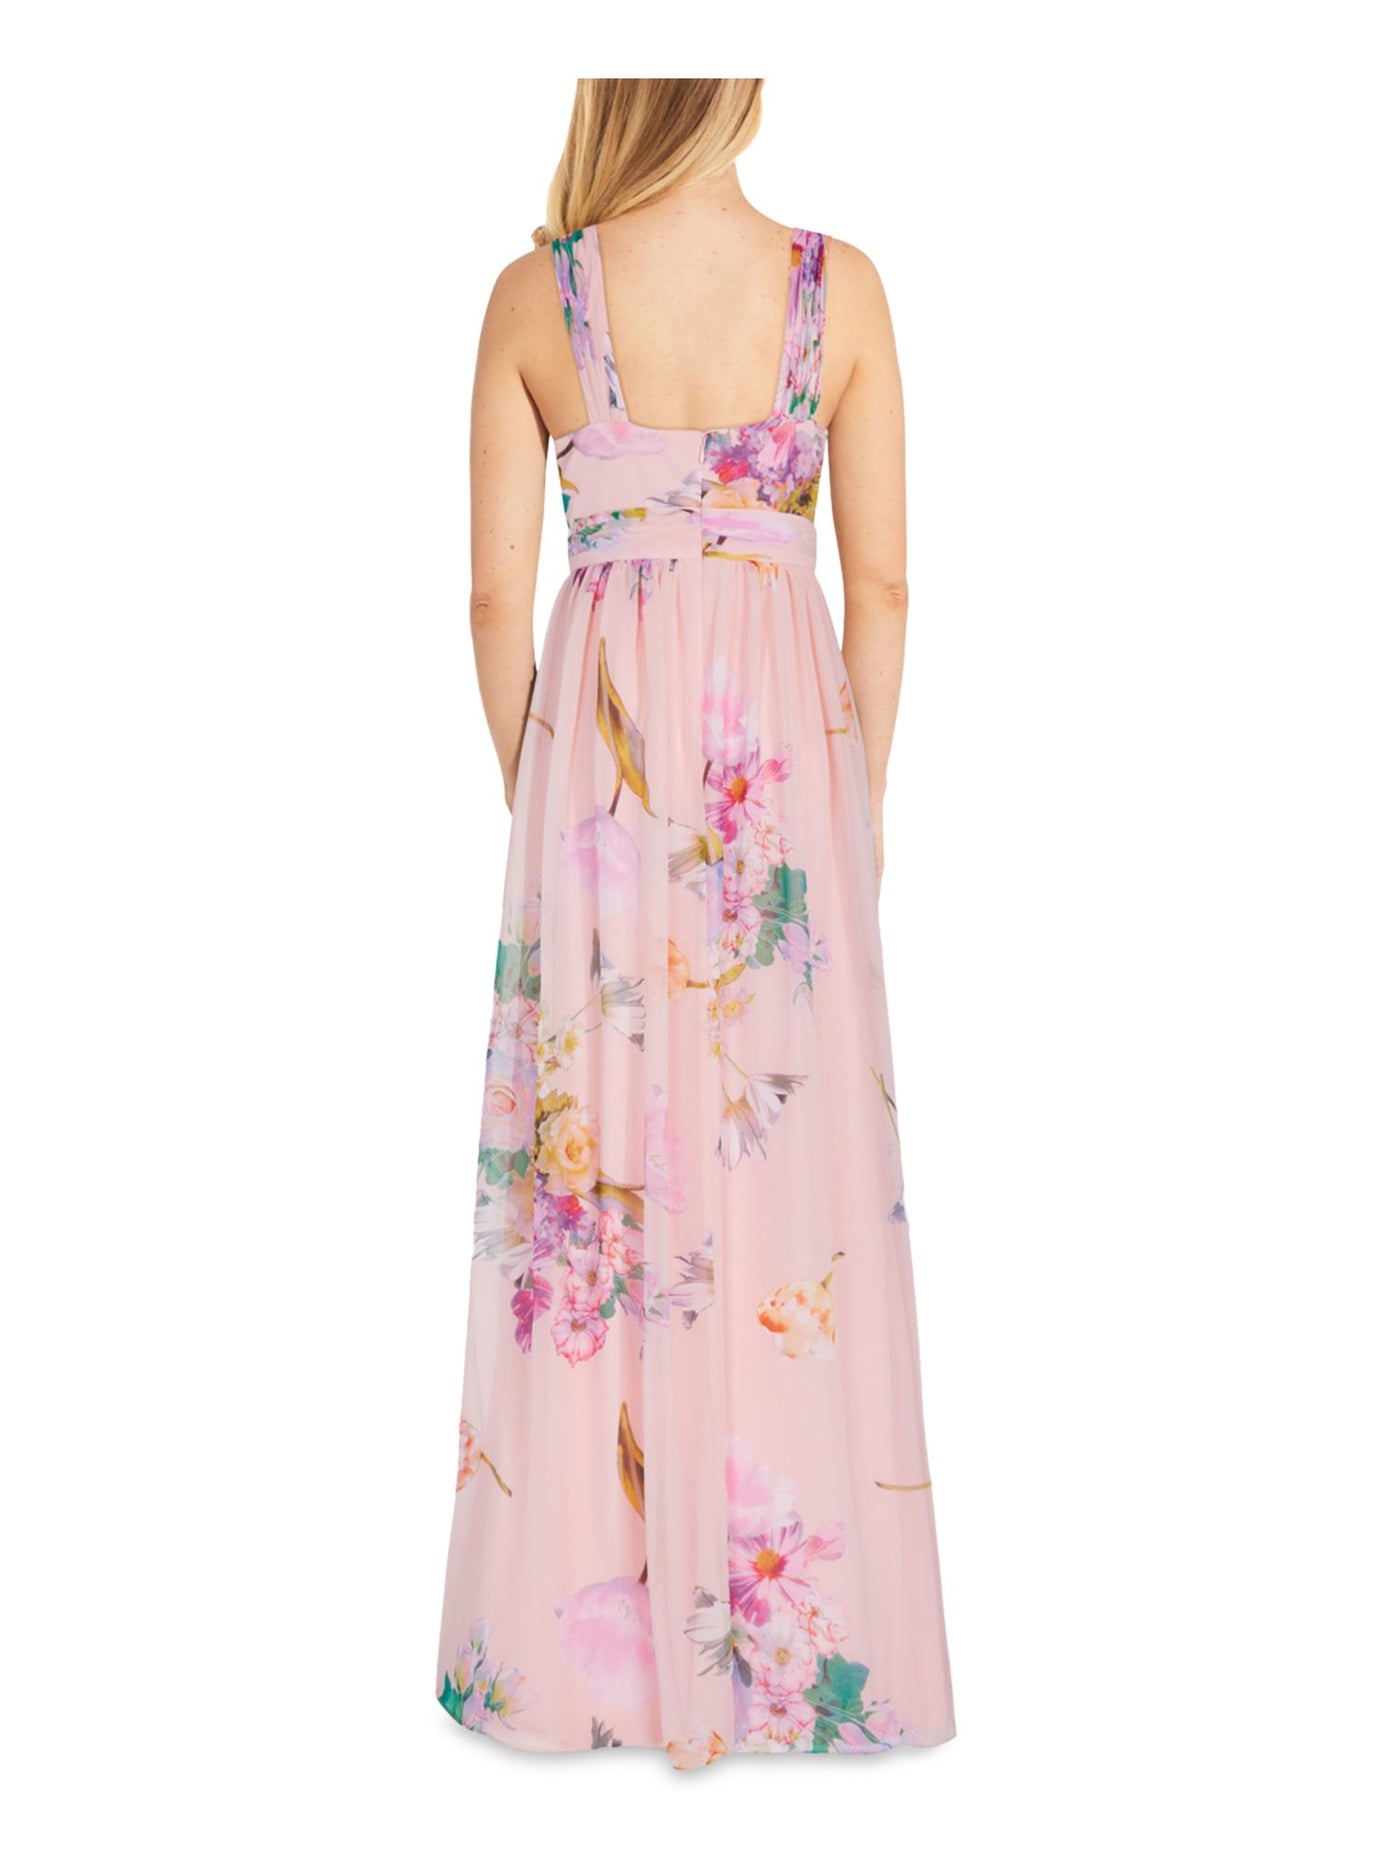 ADRIANNA PAPELL Womens Pink Zippered Pleated Floral Sleeveless Halter Full-Length Party Dress 2